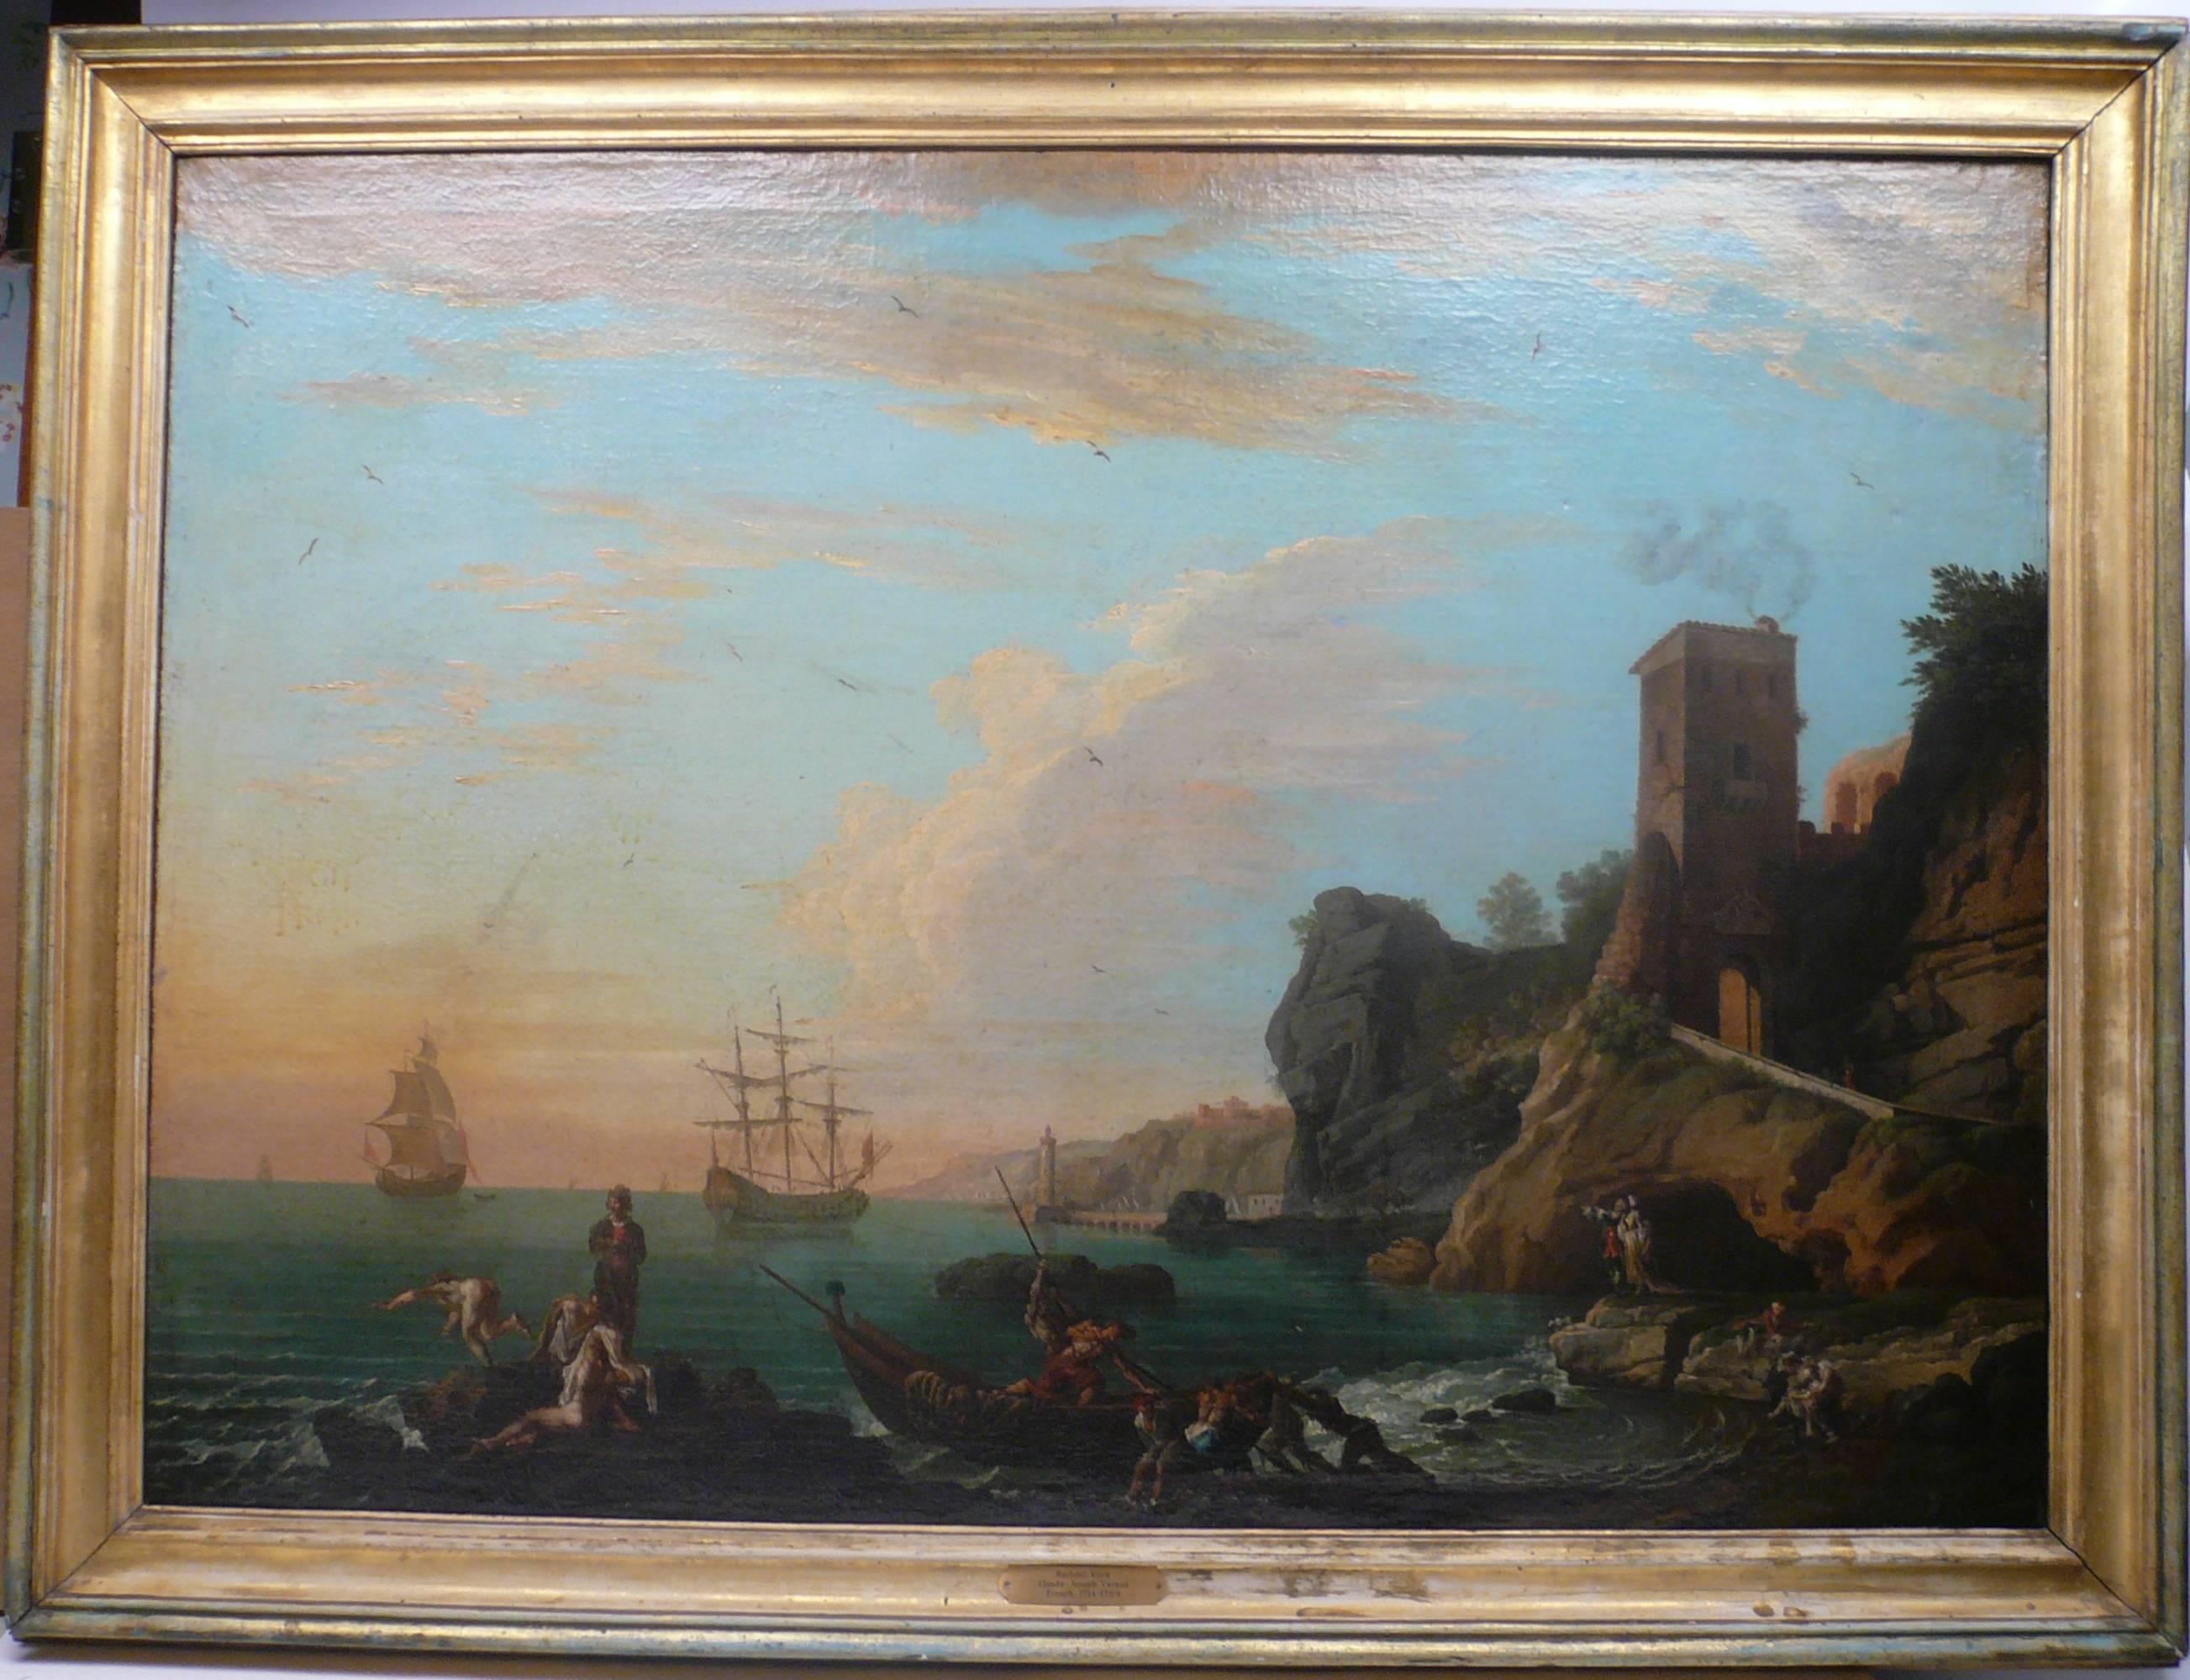 18th Century Harbor View, Attributed to Claude J. Vernet, Oil on Canvas